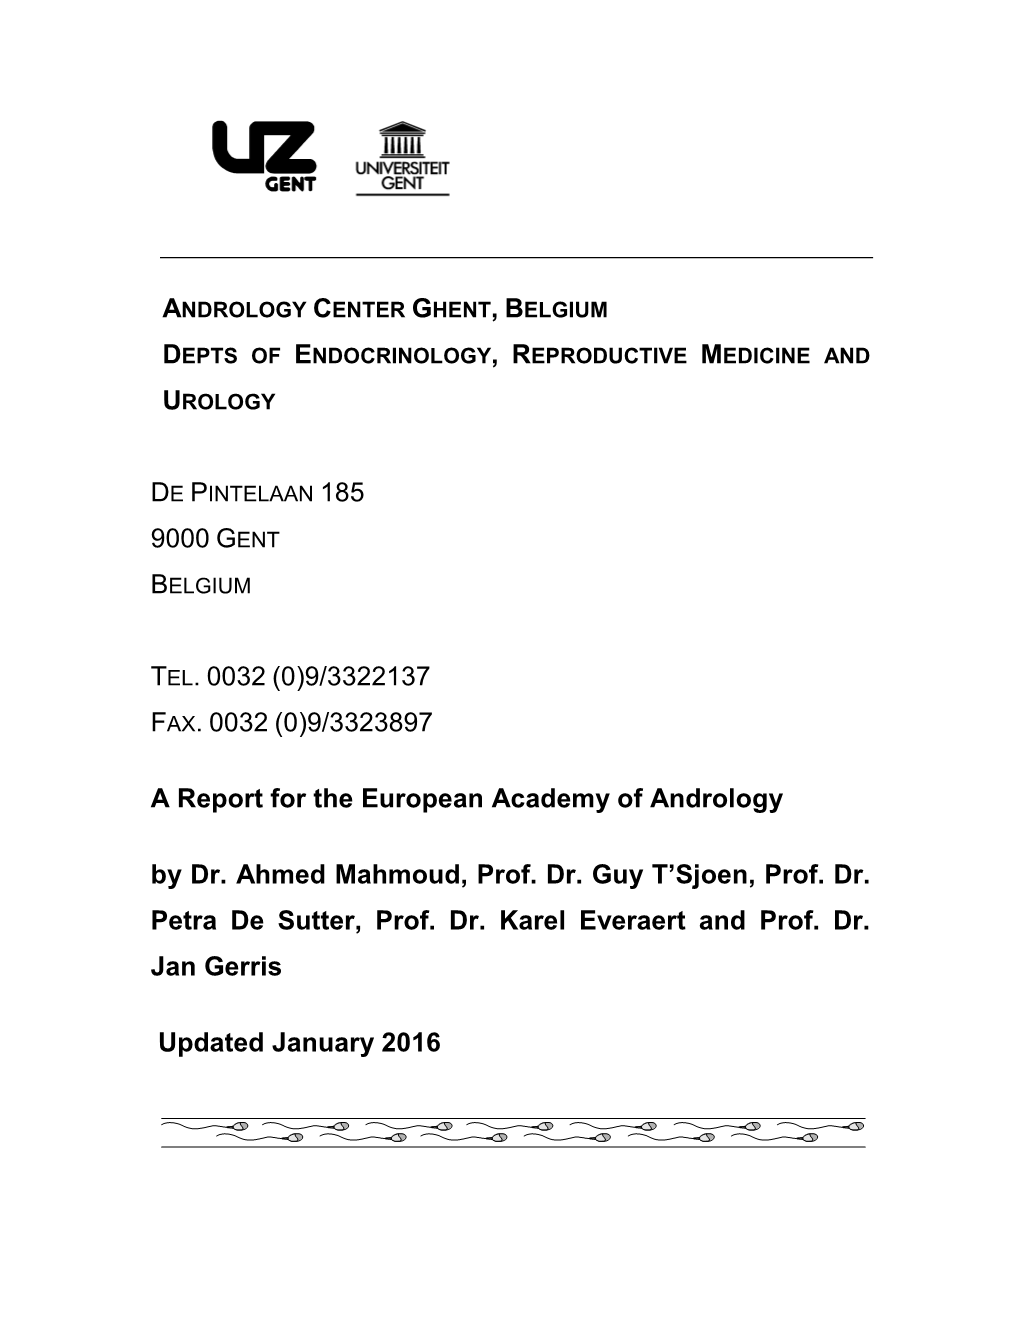 9000 GENT TEL. 0032 (0)9/3322137 FAX. 0032 (0)9/3323897 a Report for the European Academy of Andrology by Dr. Ahmed Mahmoud